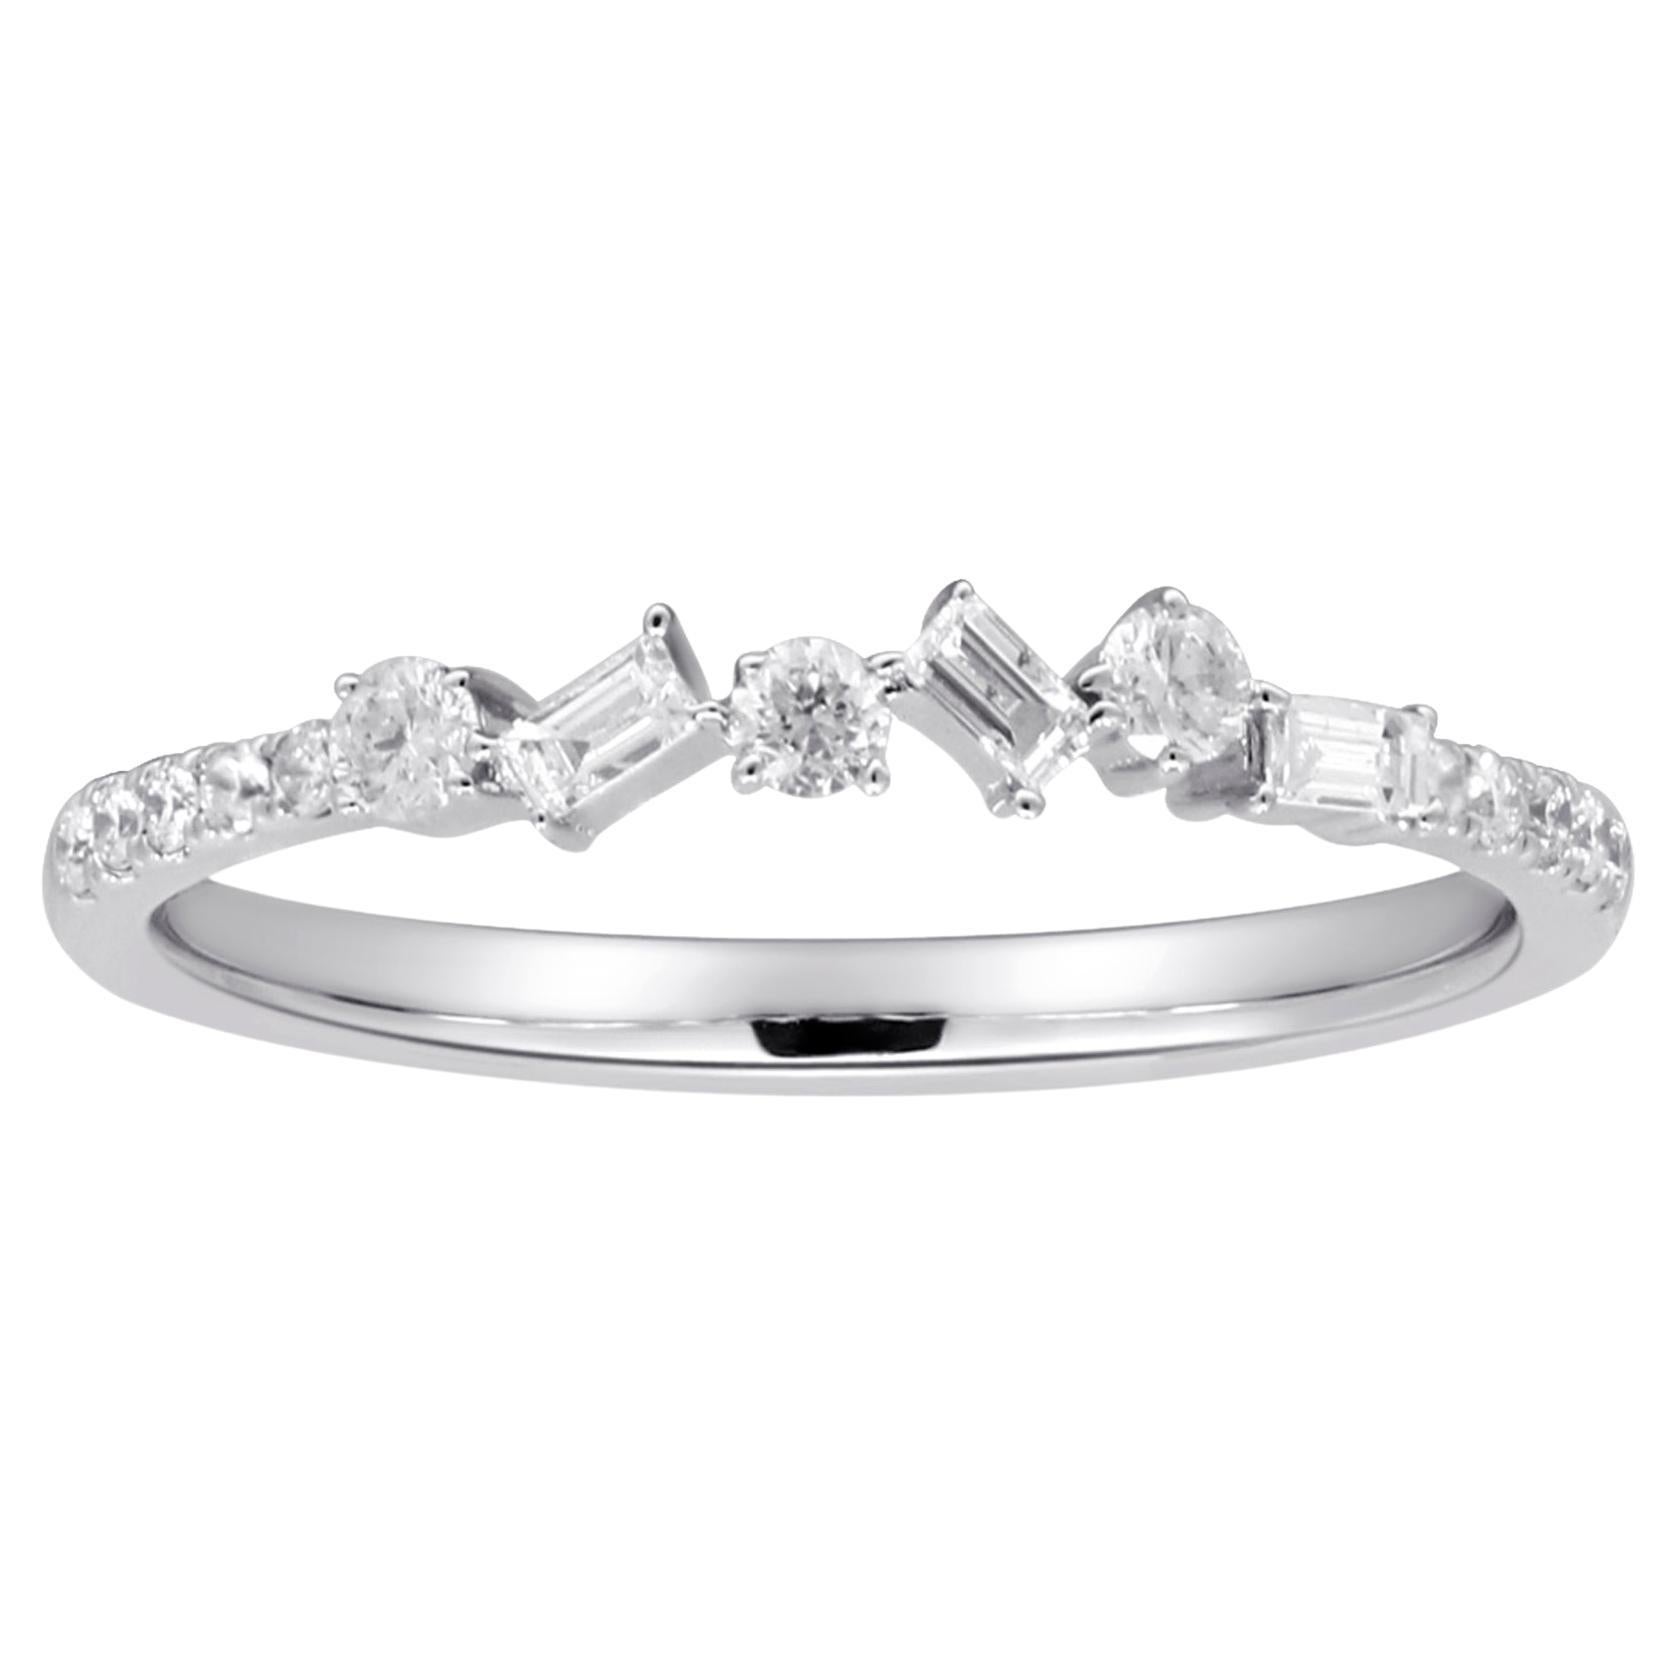 0.25 Carat Round, Baguette-Cut Diamond Accents 14K White Gold Ring For Sale